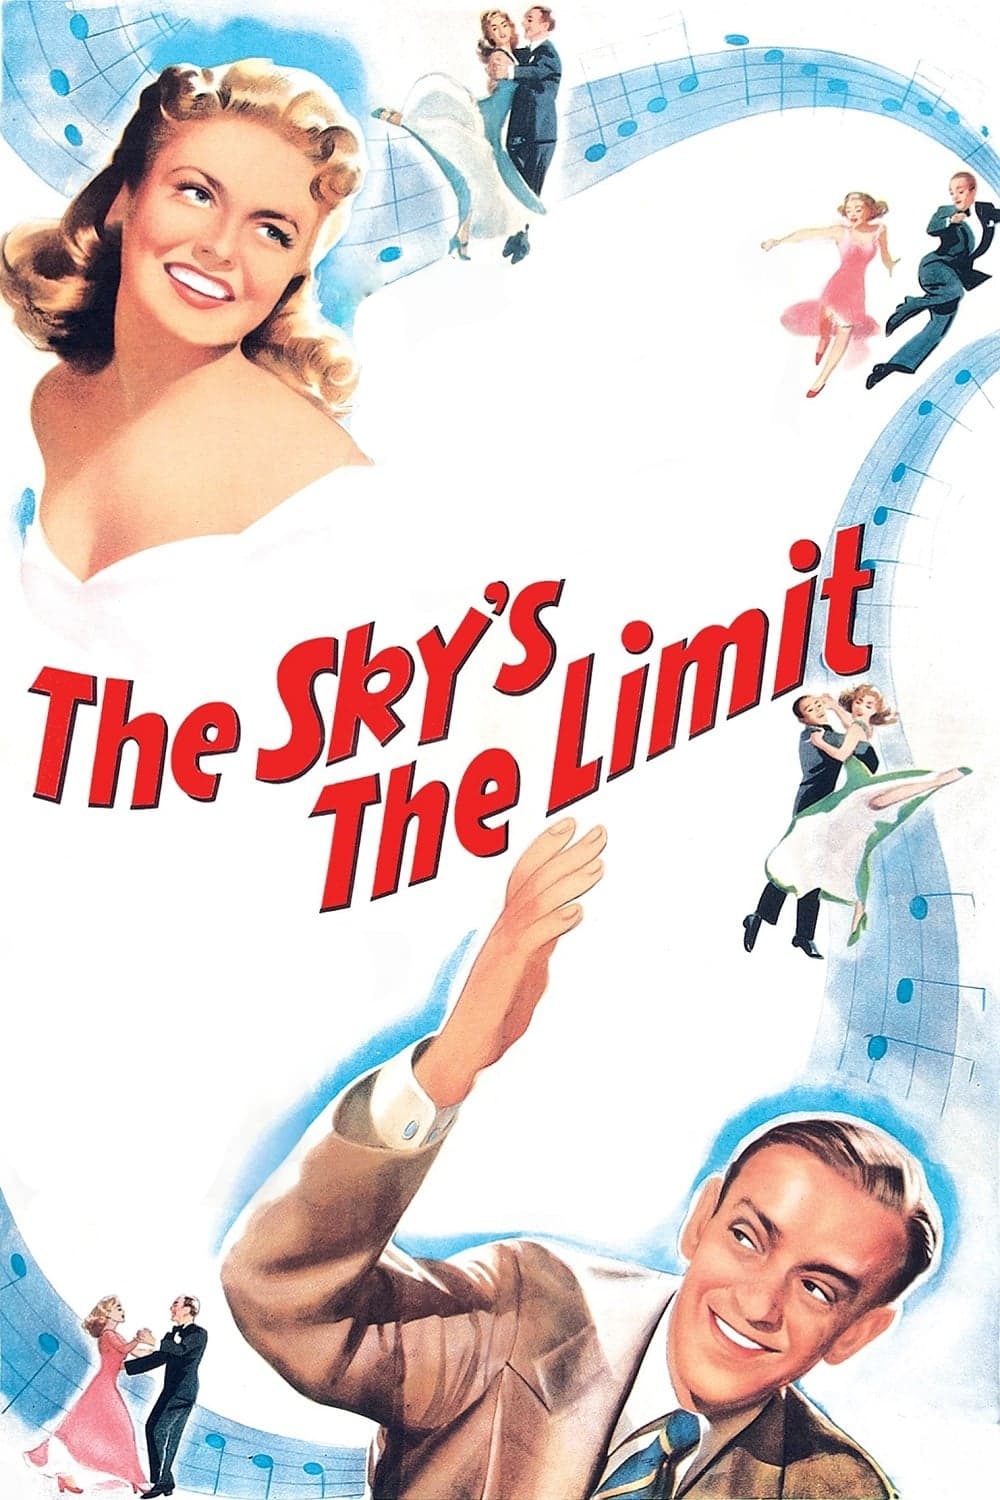 The Sky's the Limit (1943)